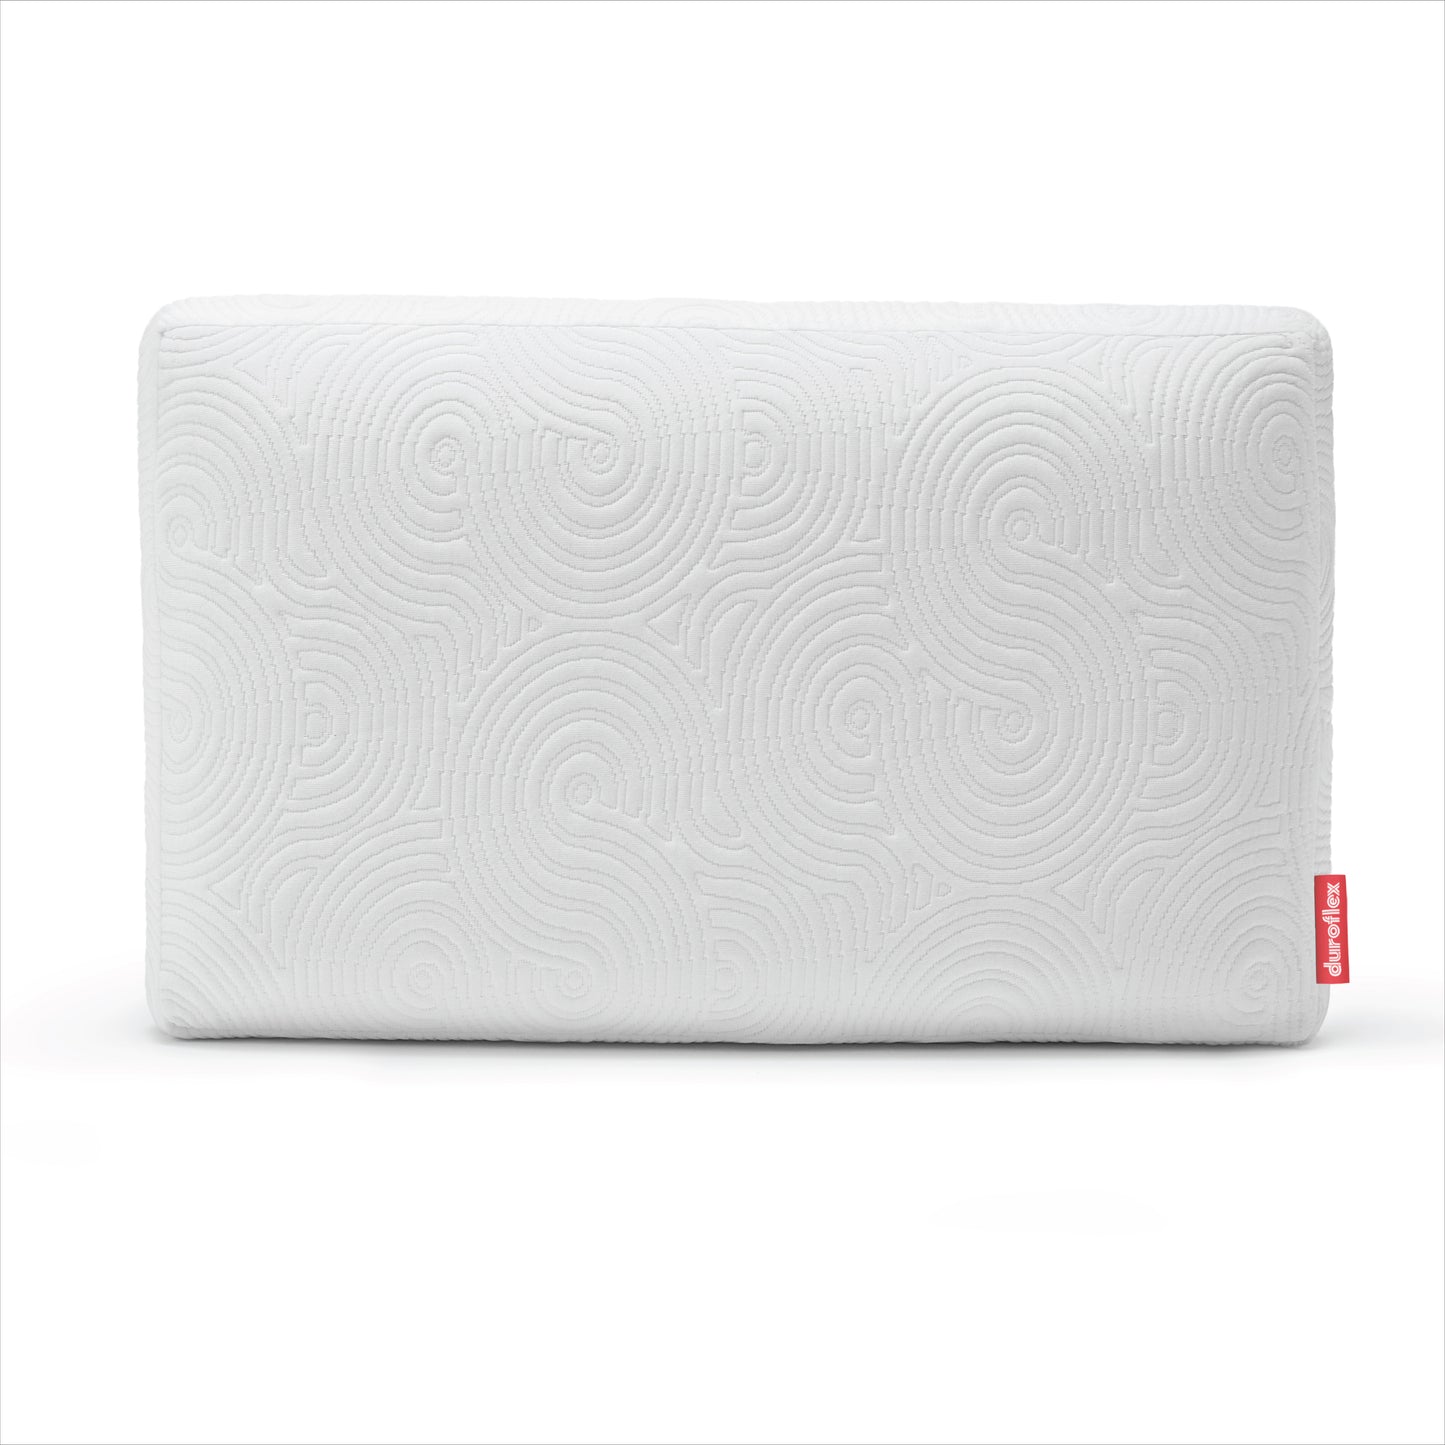 Energy Cool Gel Antimicrobial Pillow